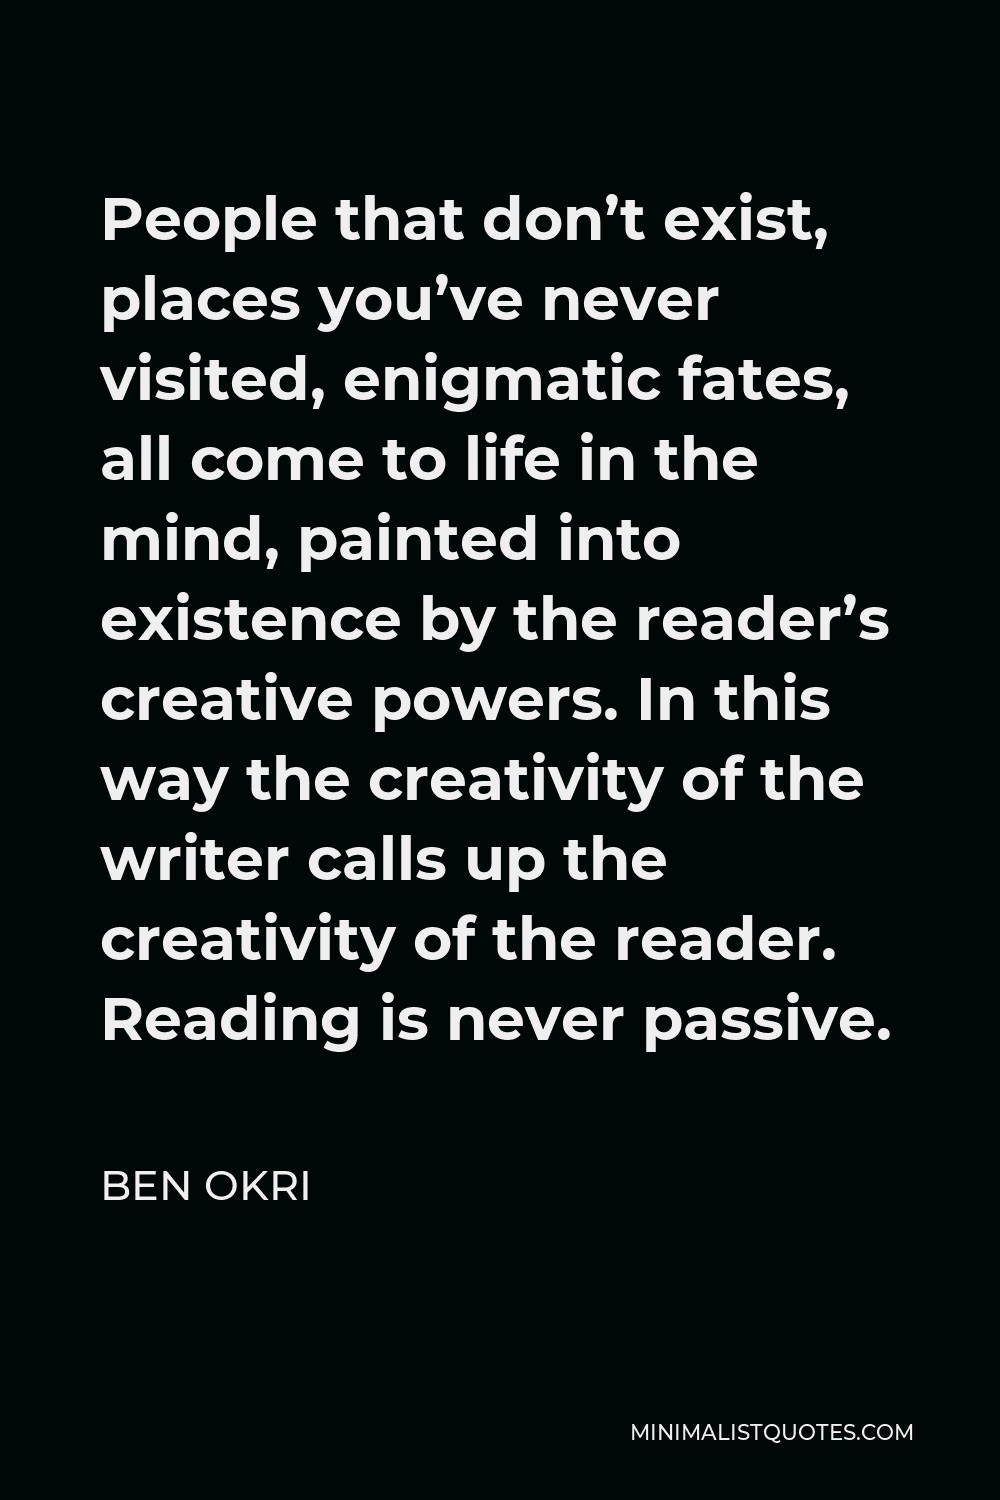 Ben Okri Quote - People that don’t exist, places you’ve never visited, enigmatic fates, all come to life in the mind, painted into existence by the reader’s creative powers. In this way the creativity of the writer calls up the creativity of the reader. Reading is never passive.